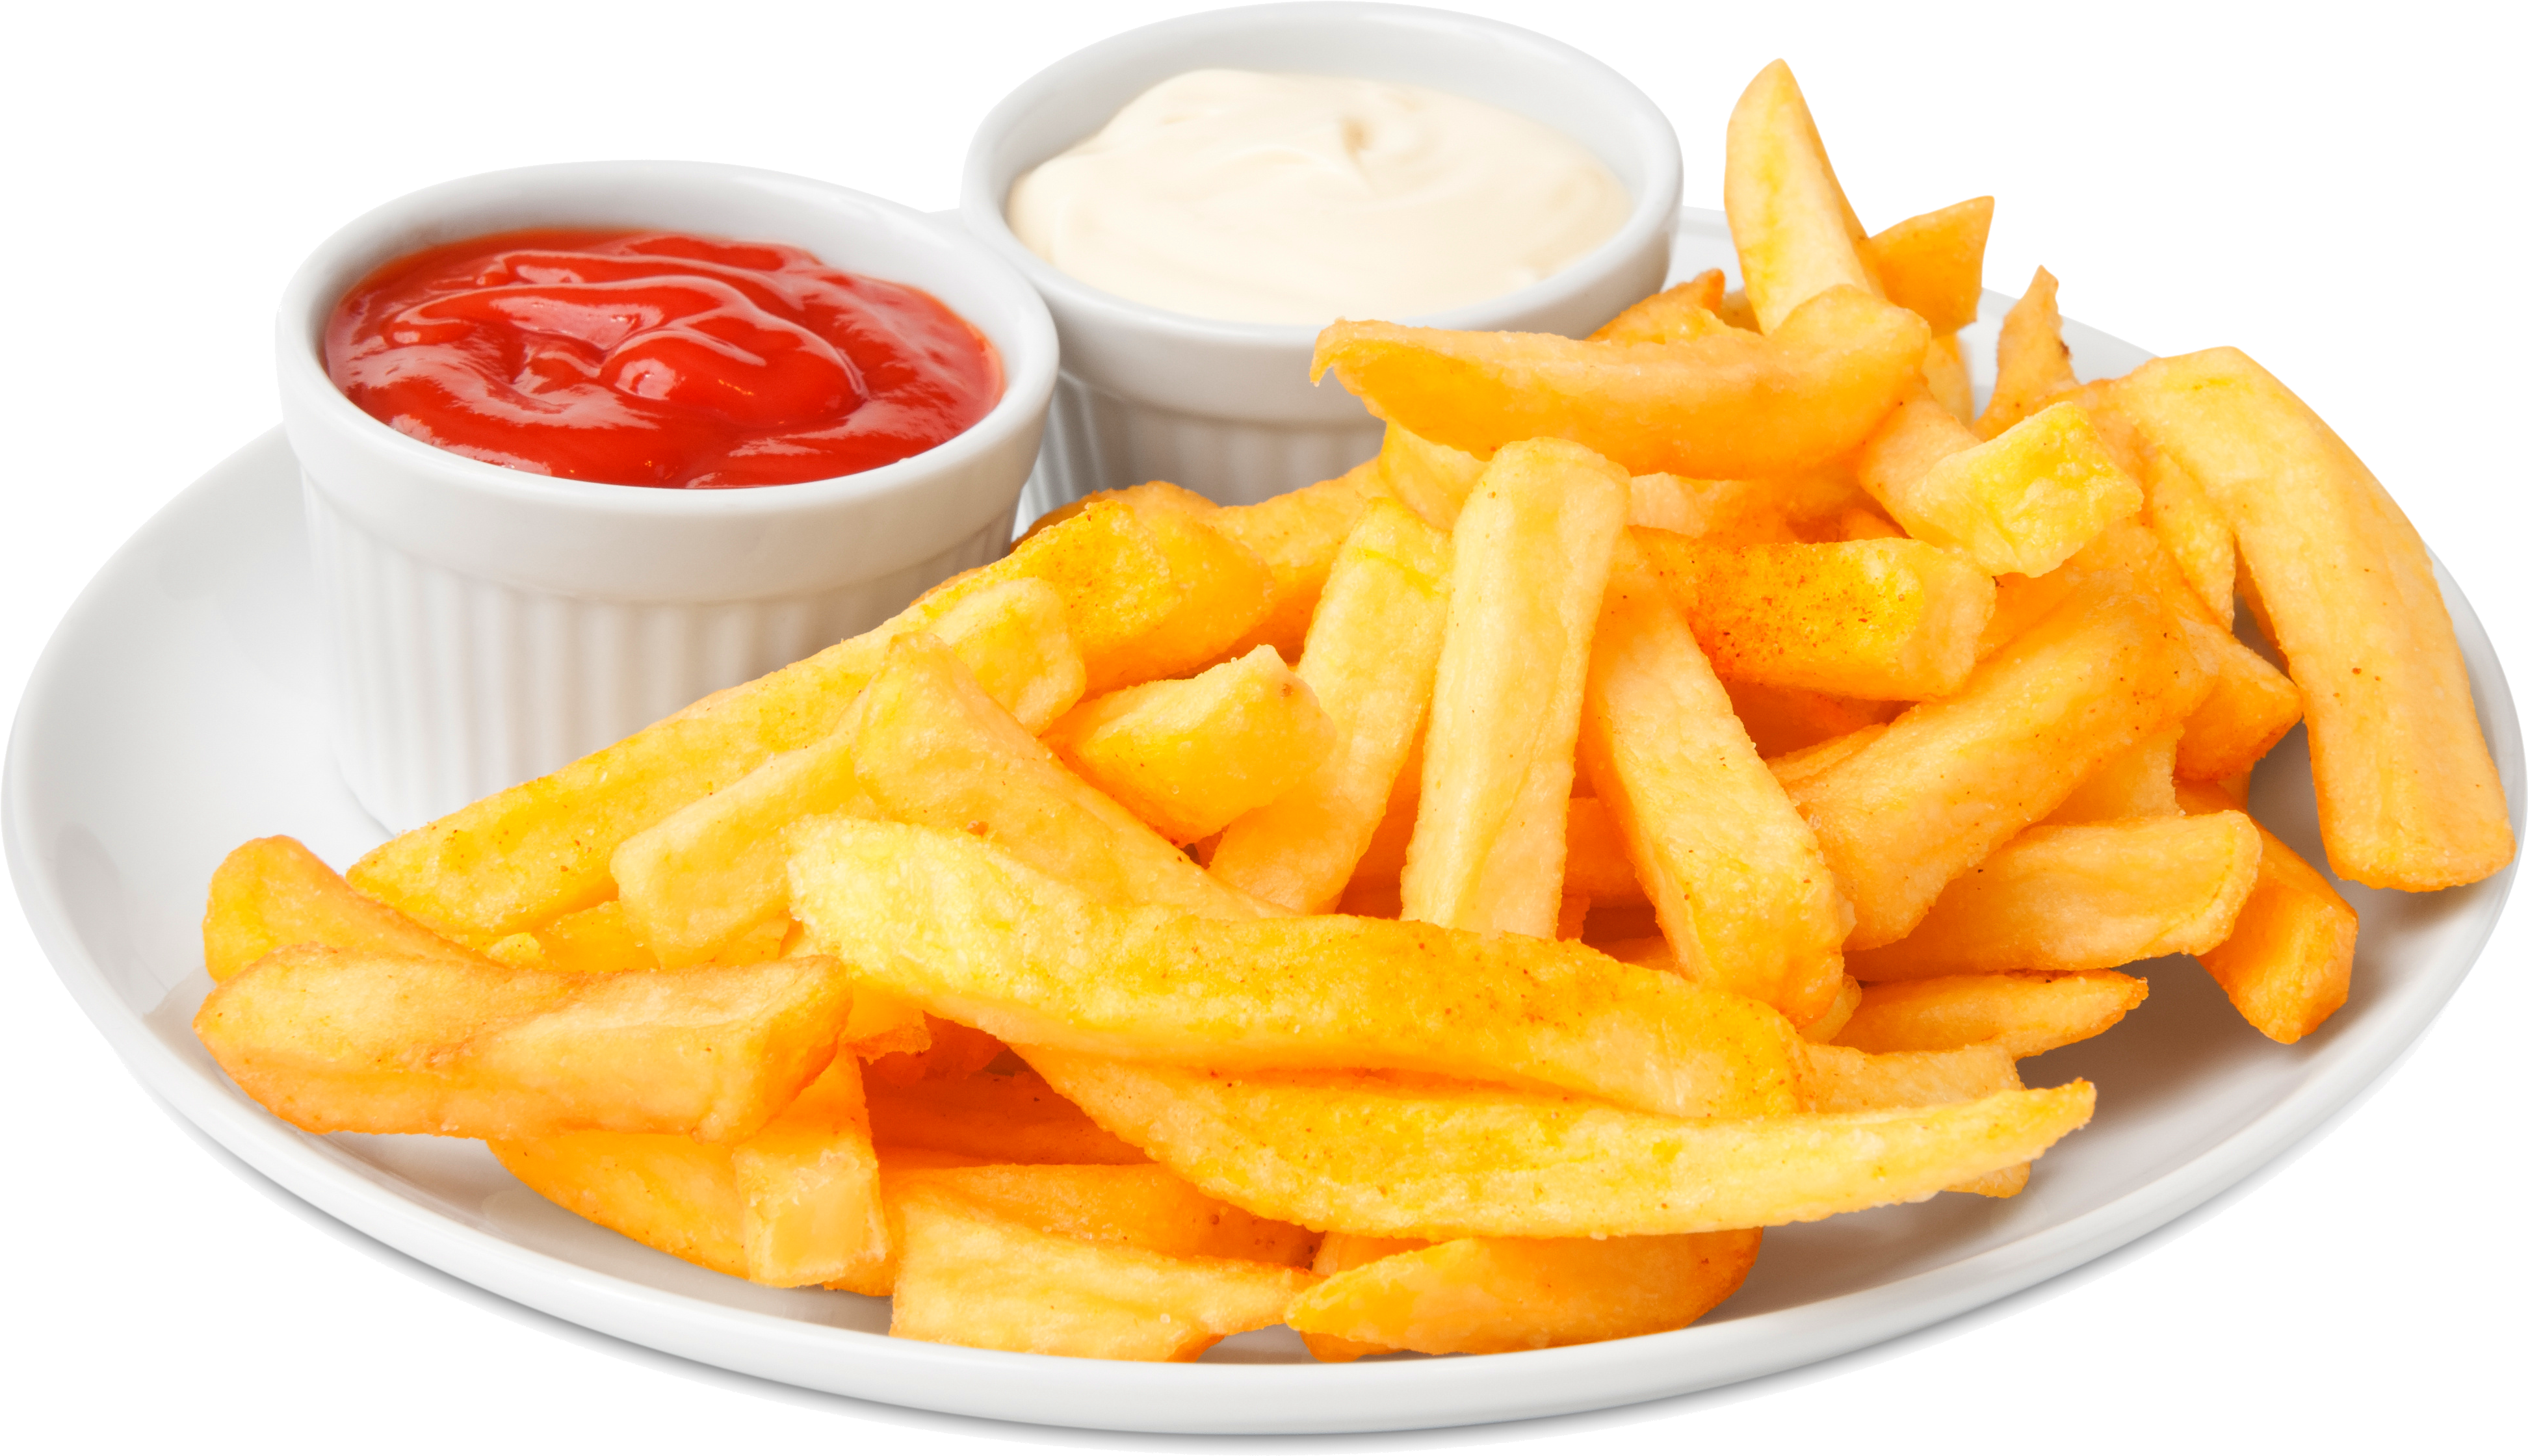 A Plate Of French Fries With Two Bowls Of Ketchup